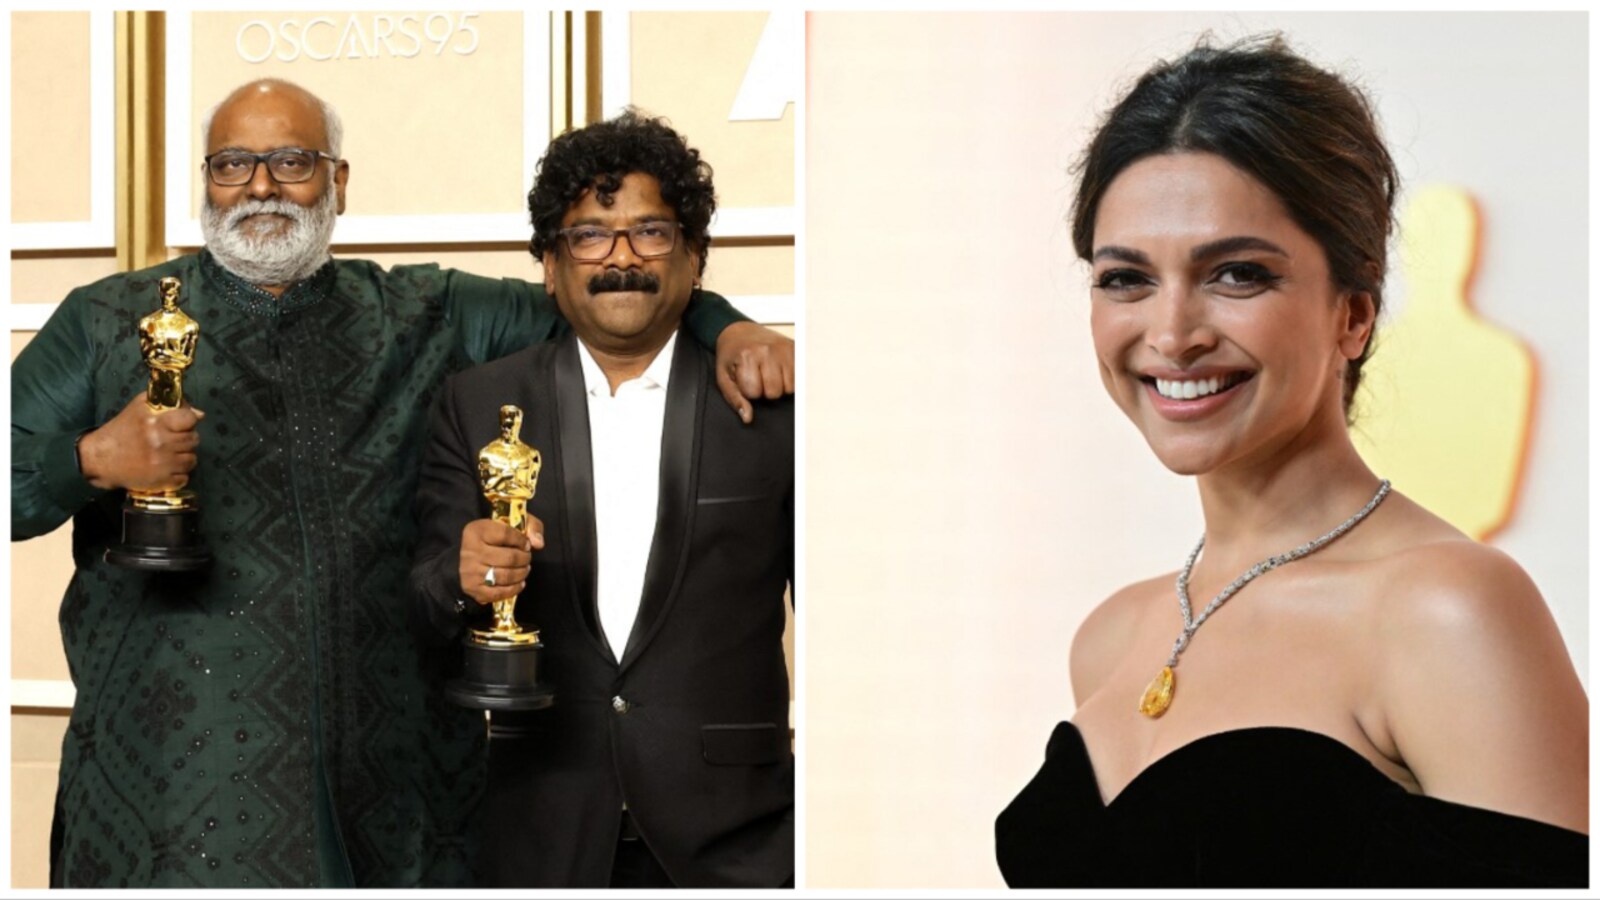 Deepika Padukone will be one of the presenters at Oscars 95 this